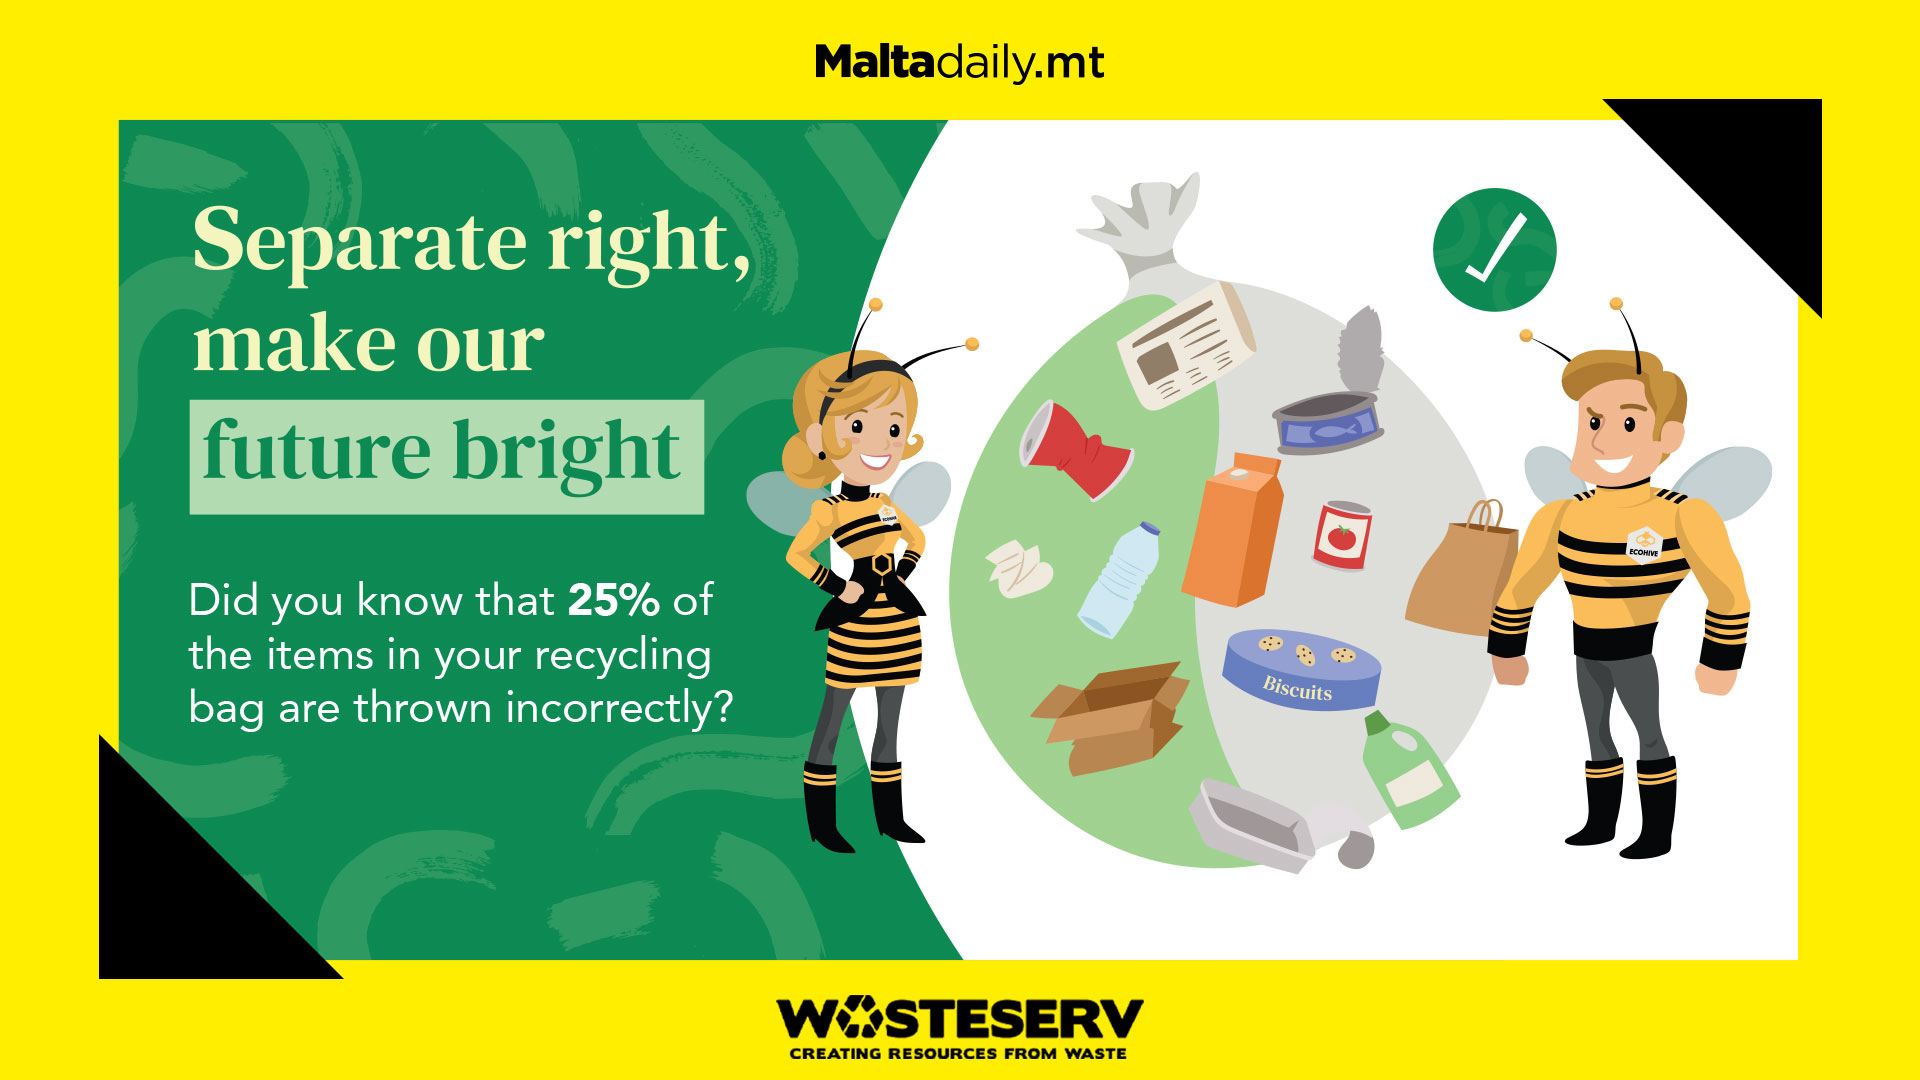 Waste separation is more important than ever and here's how you should do it